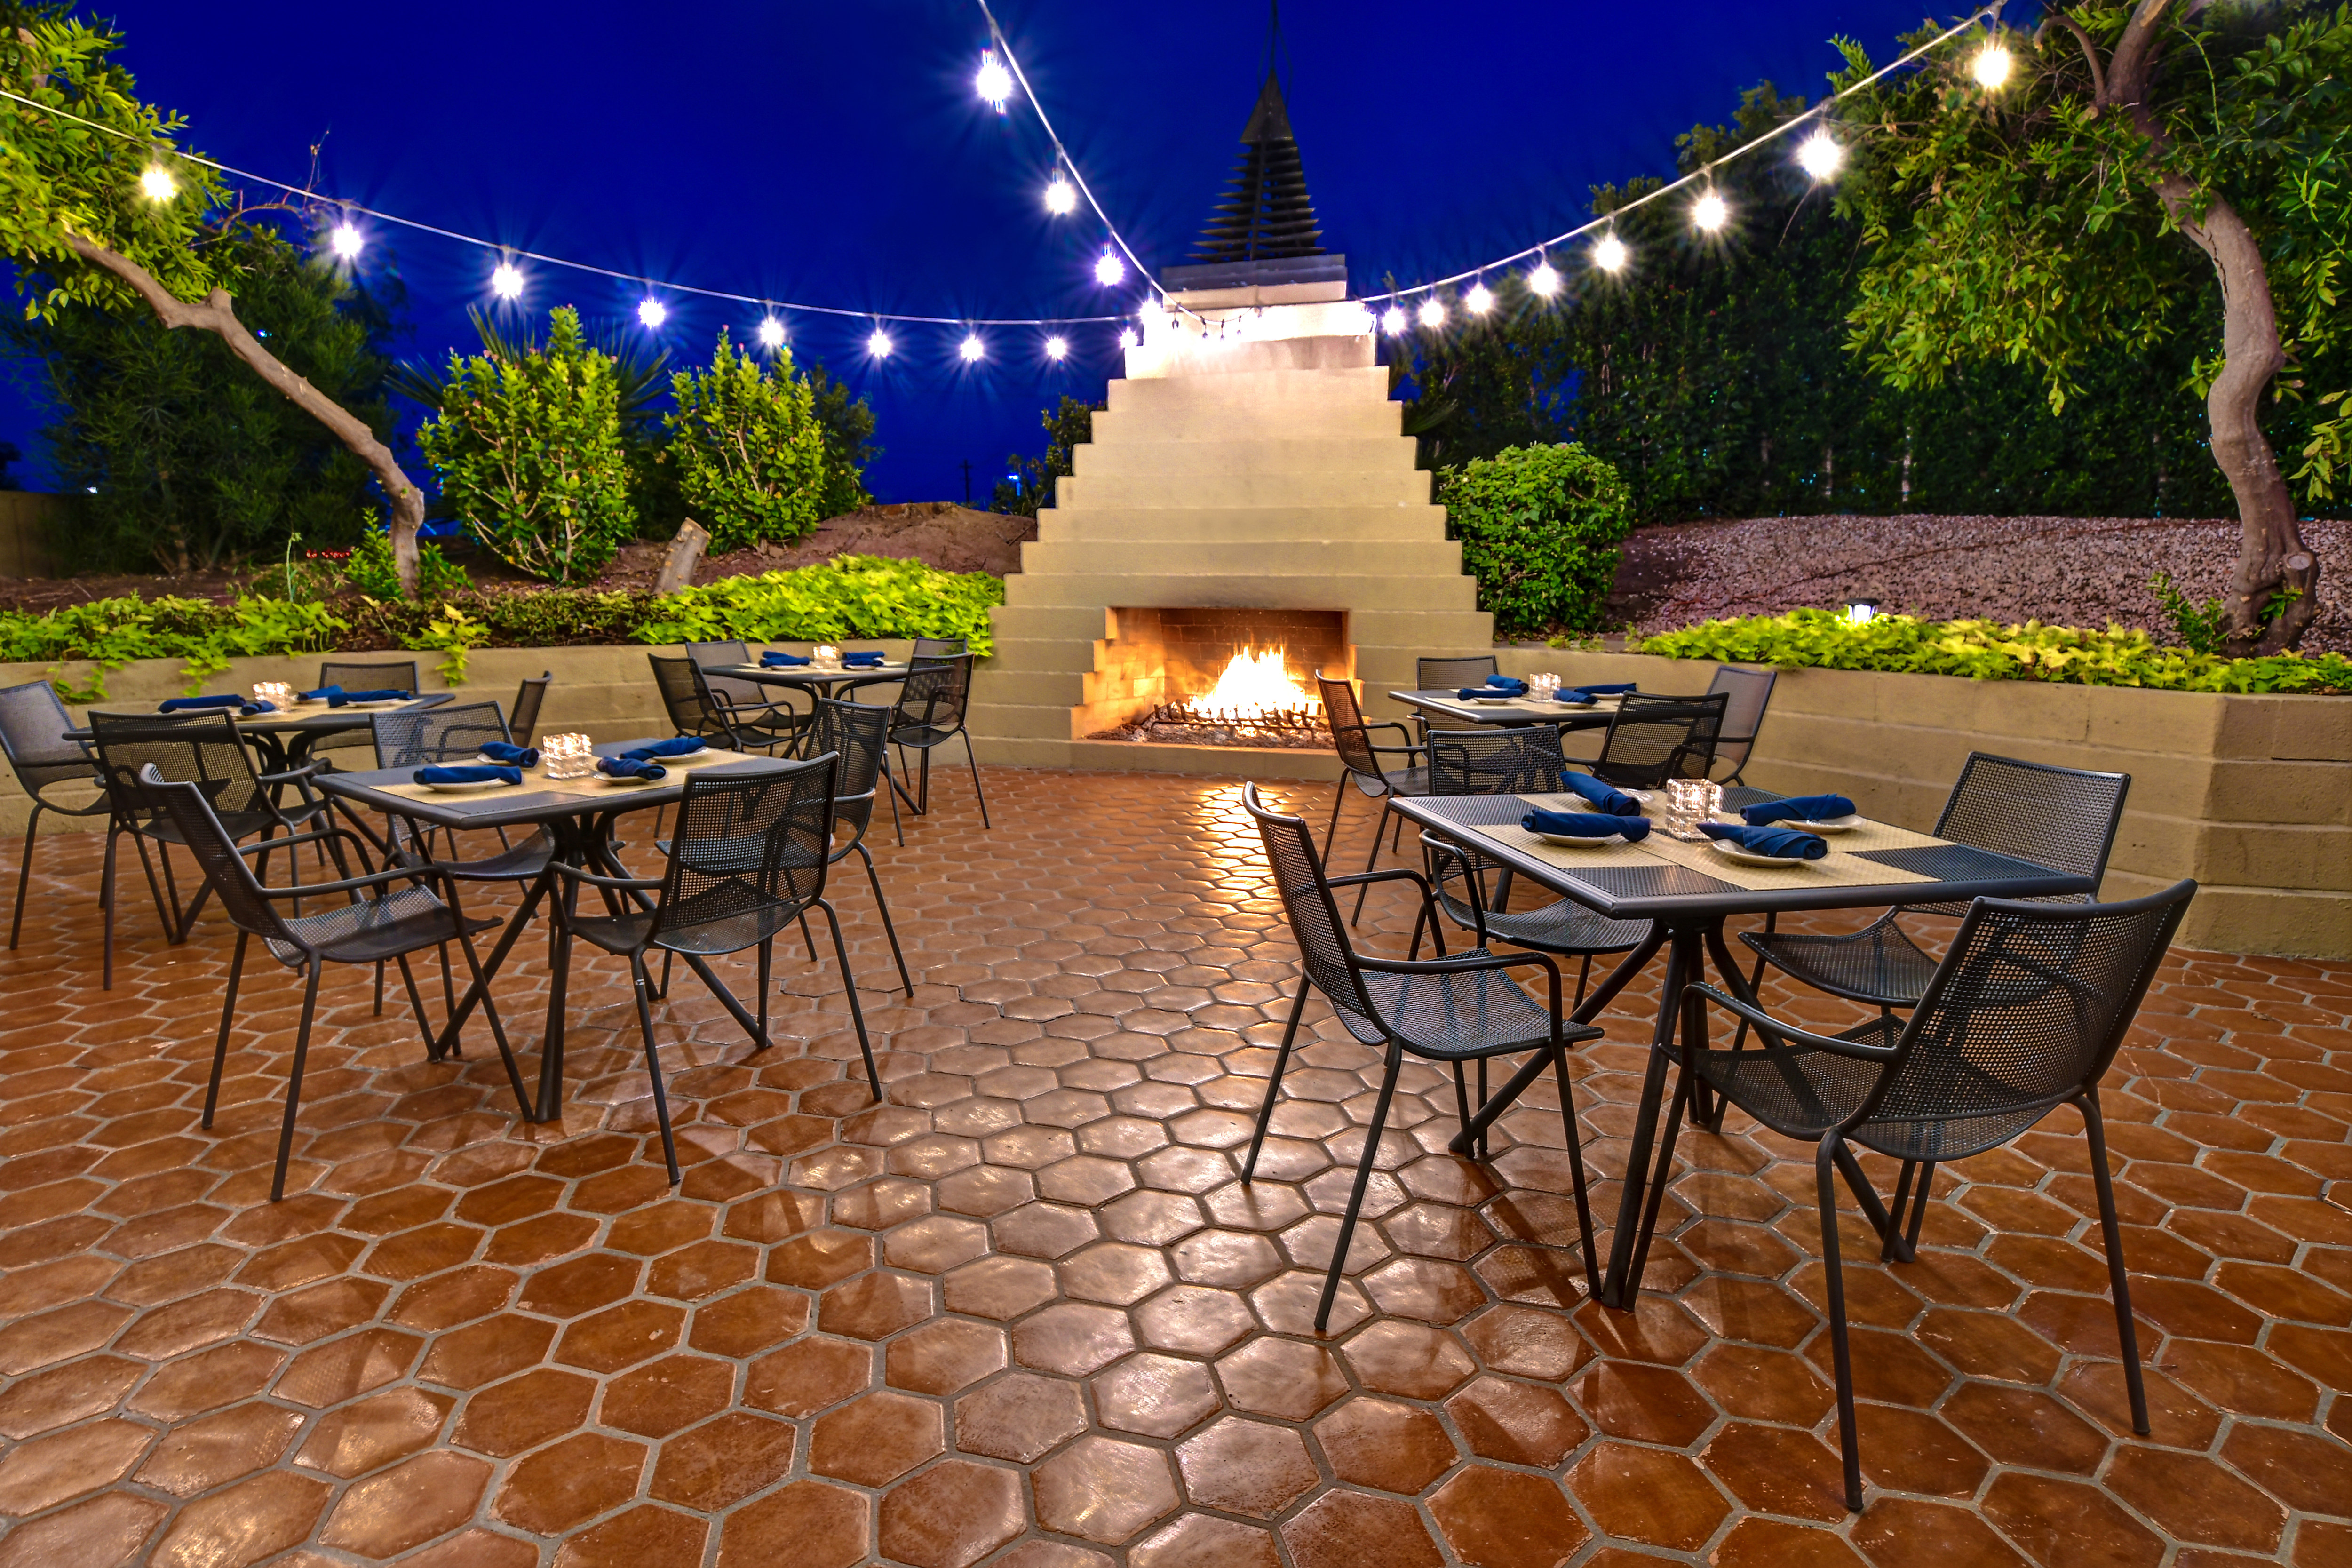 outdoor seating area with fireplace at dusk